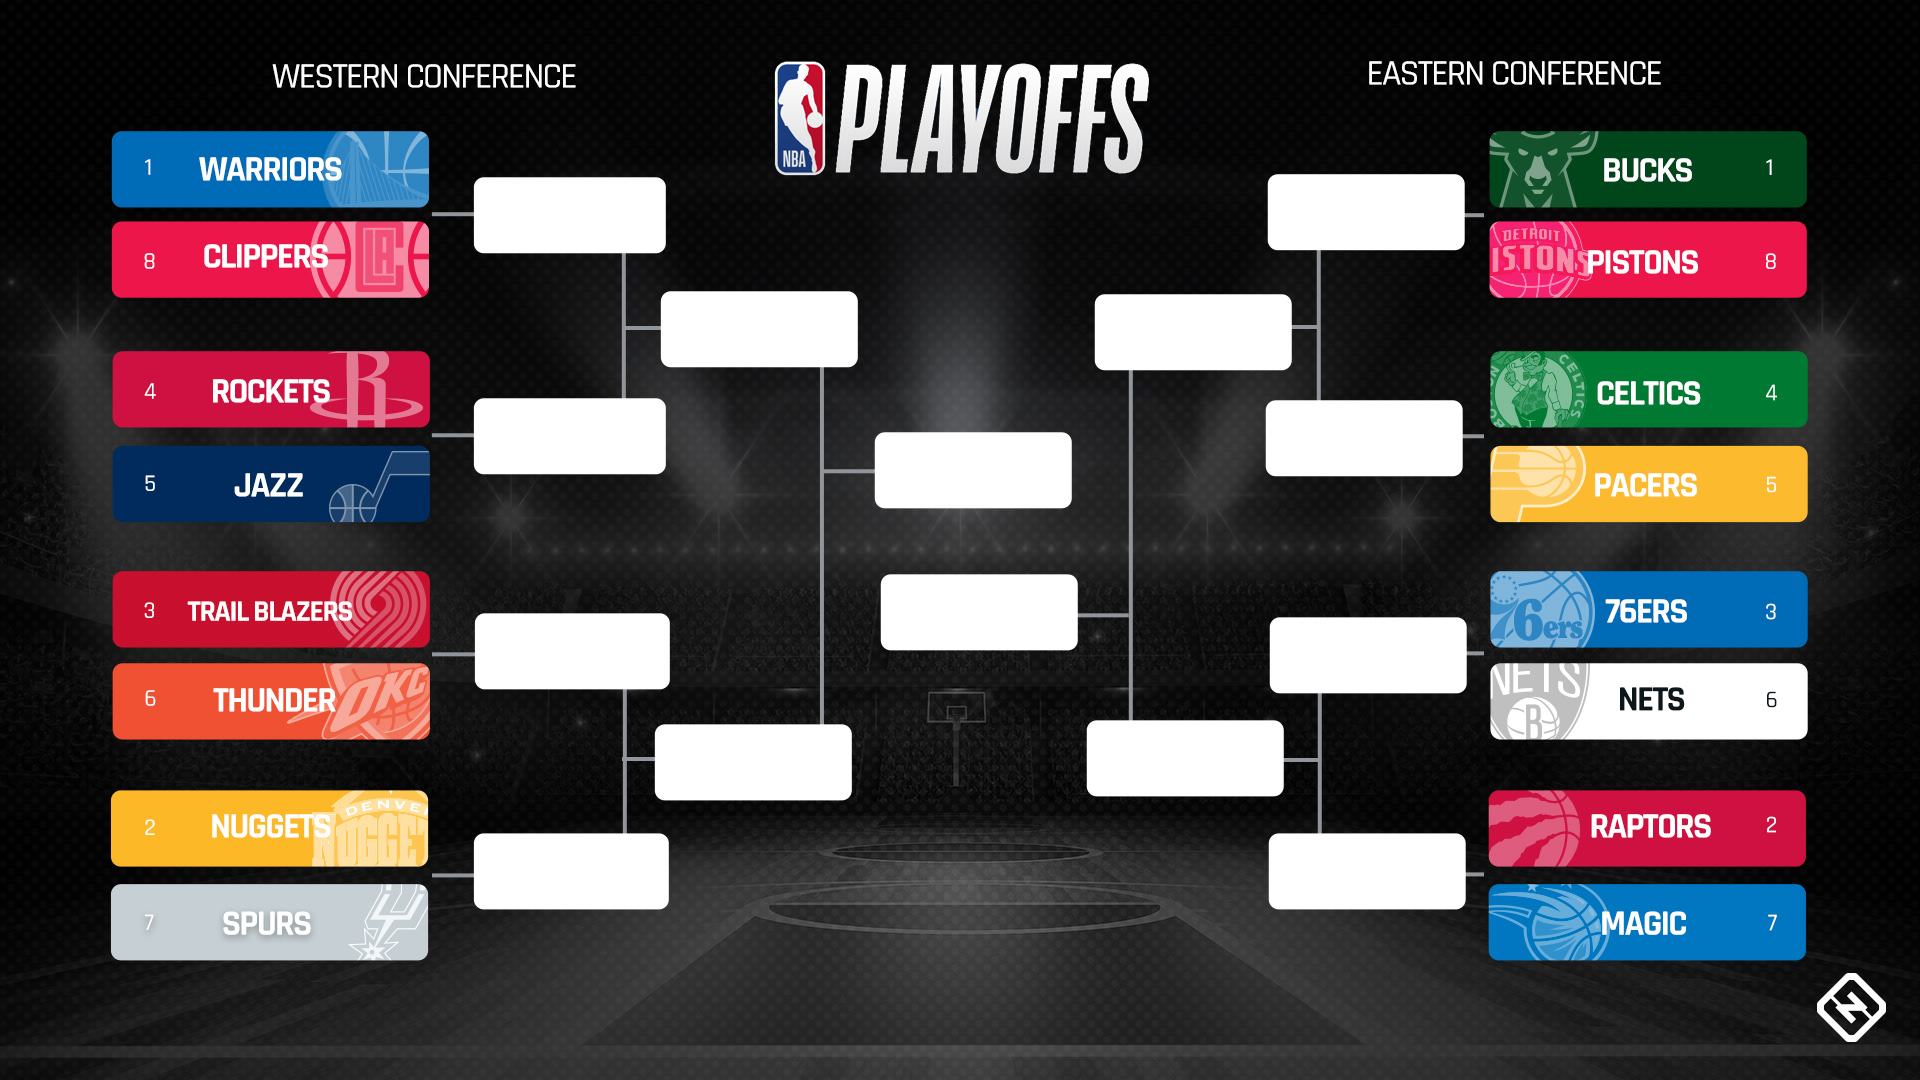 NBA playoffs today 2019 Live scores, TV schedule, updates from